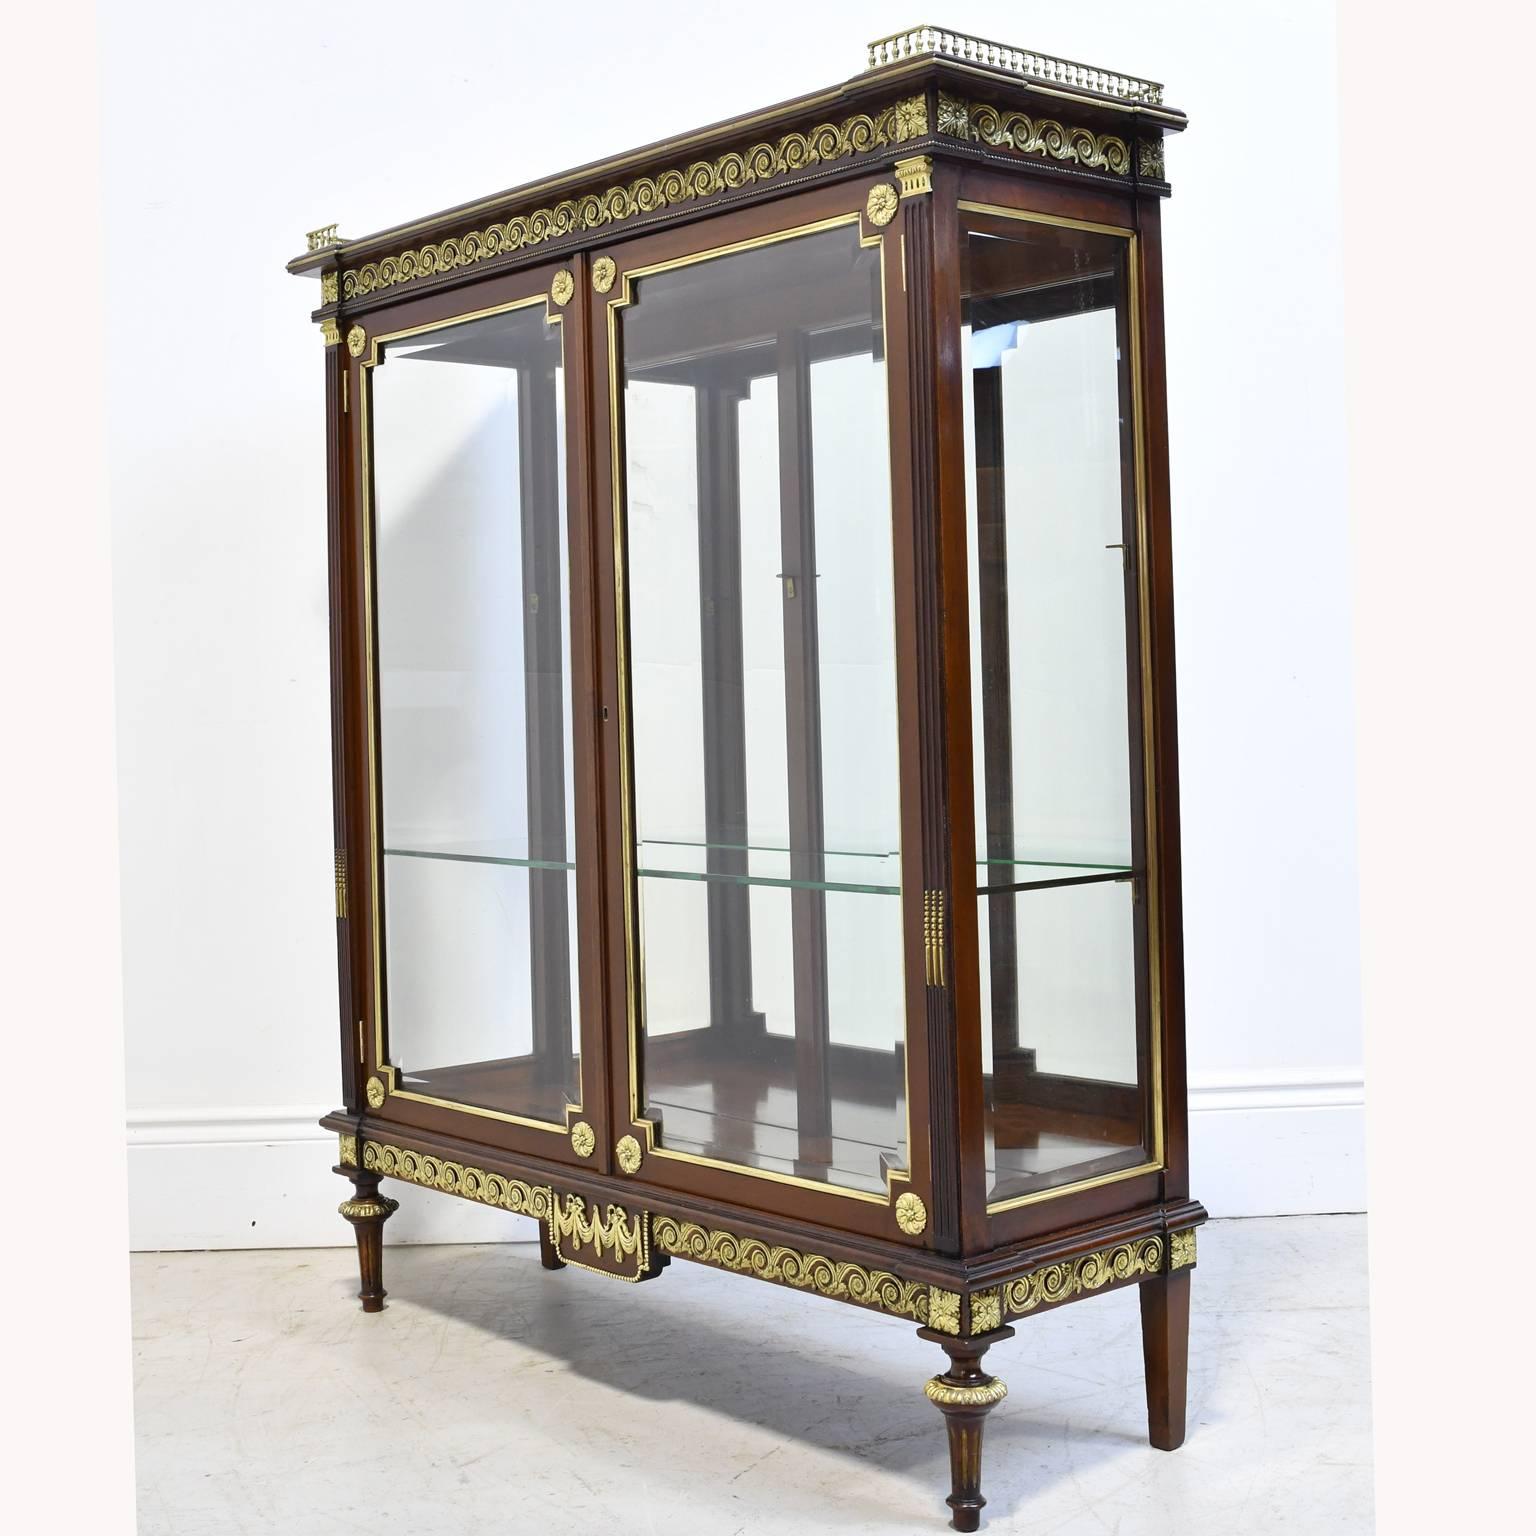 Cast NYC Gilded Age Louis XVI Style Display Cabinet, Attributable to Leon Marcotte